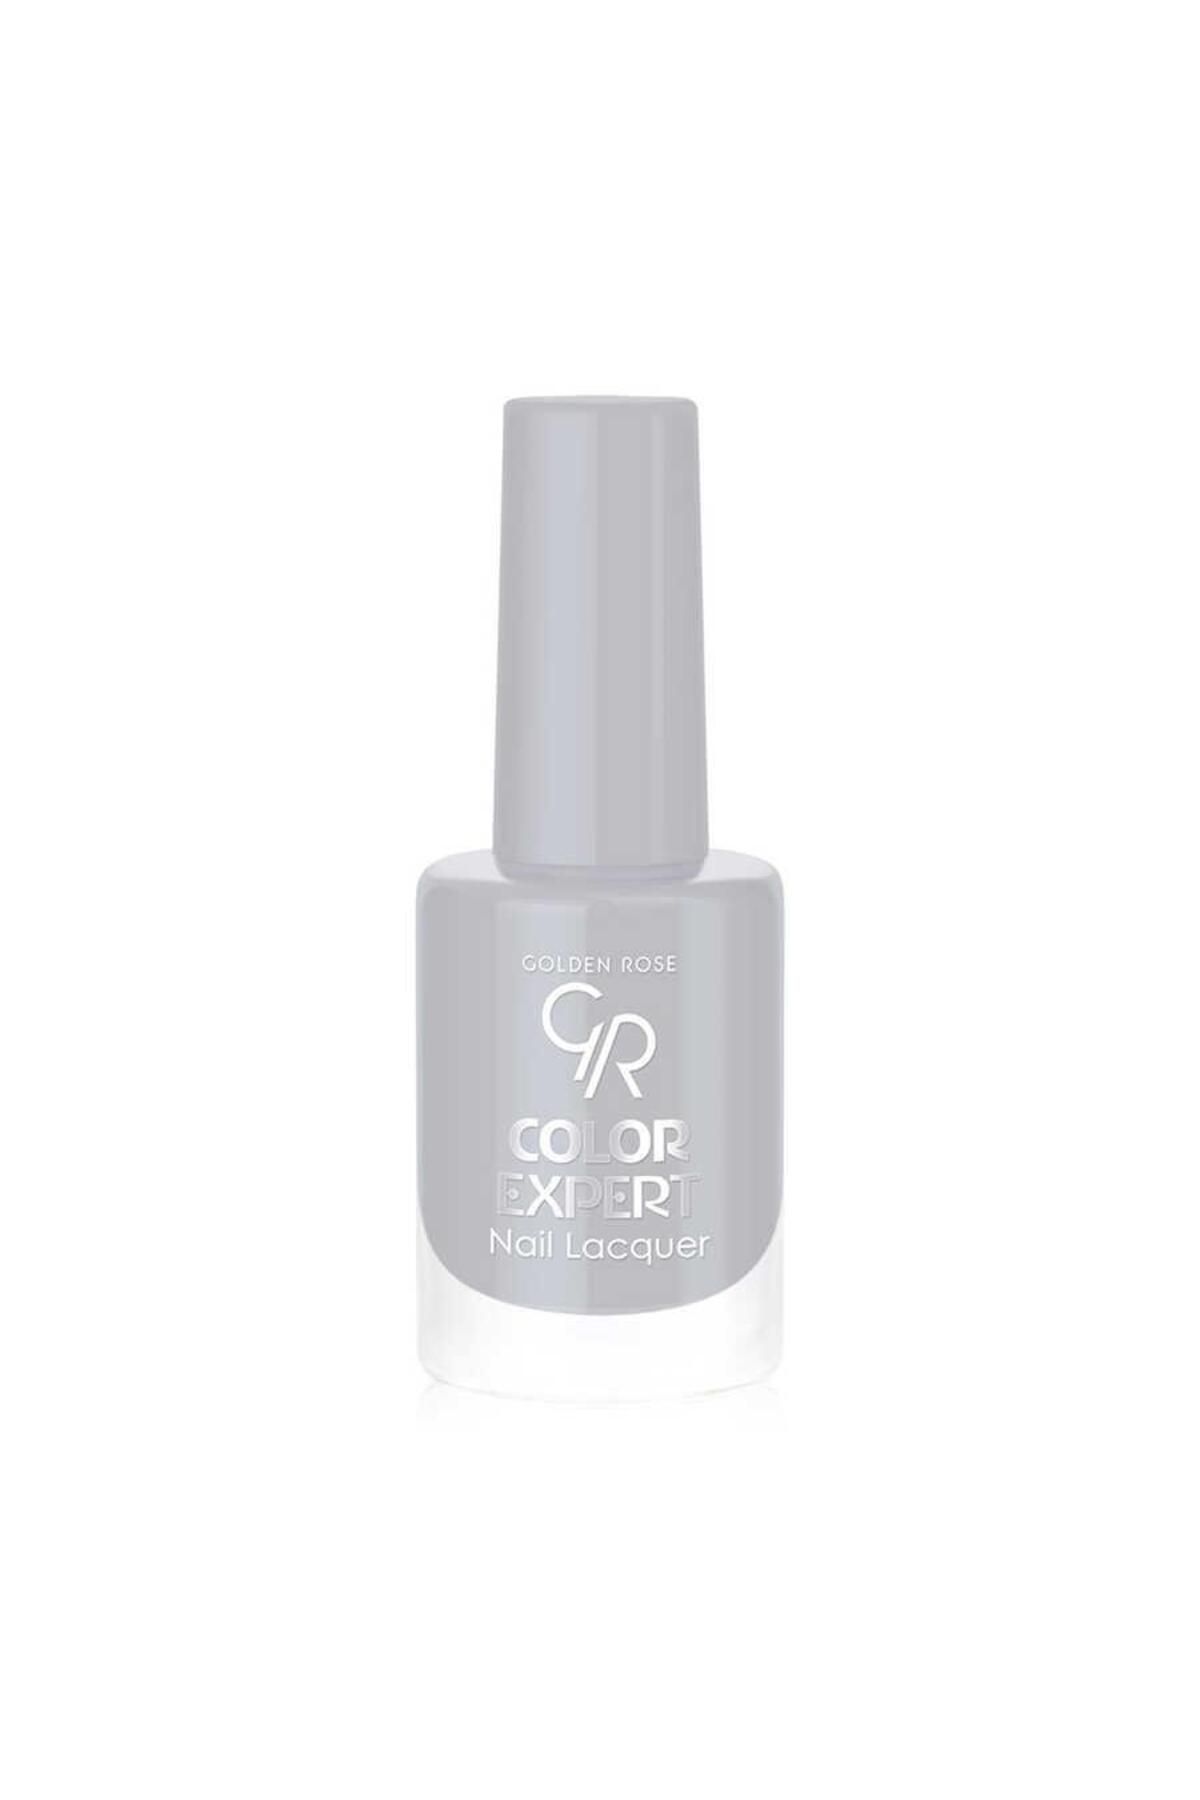 Golden Rose Color Expert Nail Lacquer Oje - 115